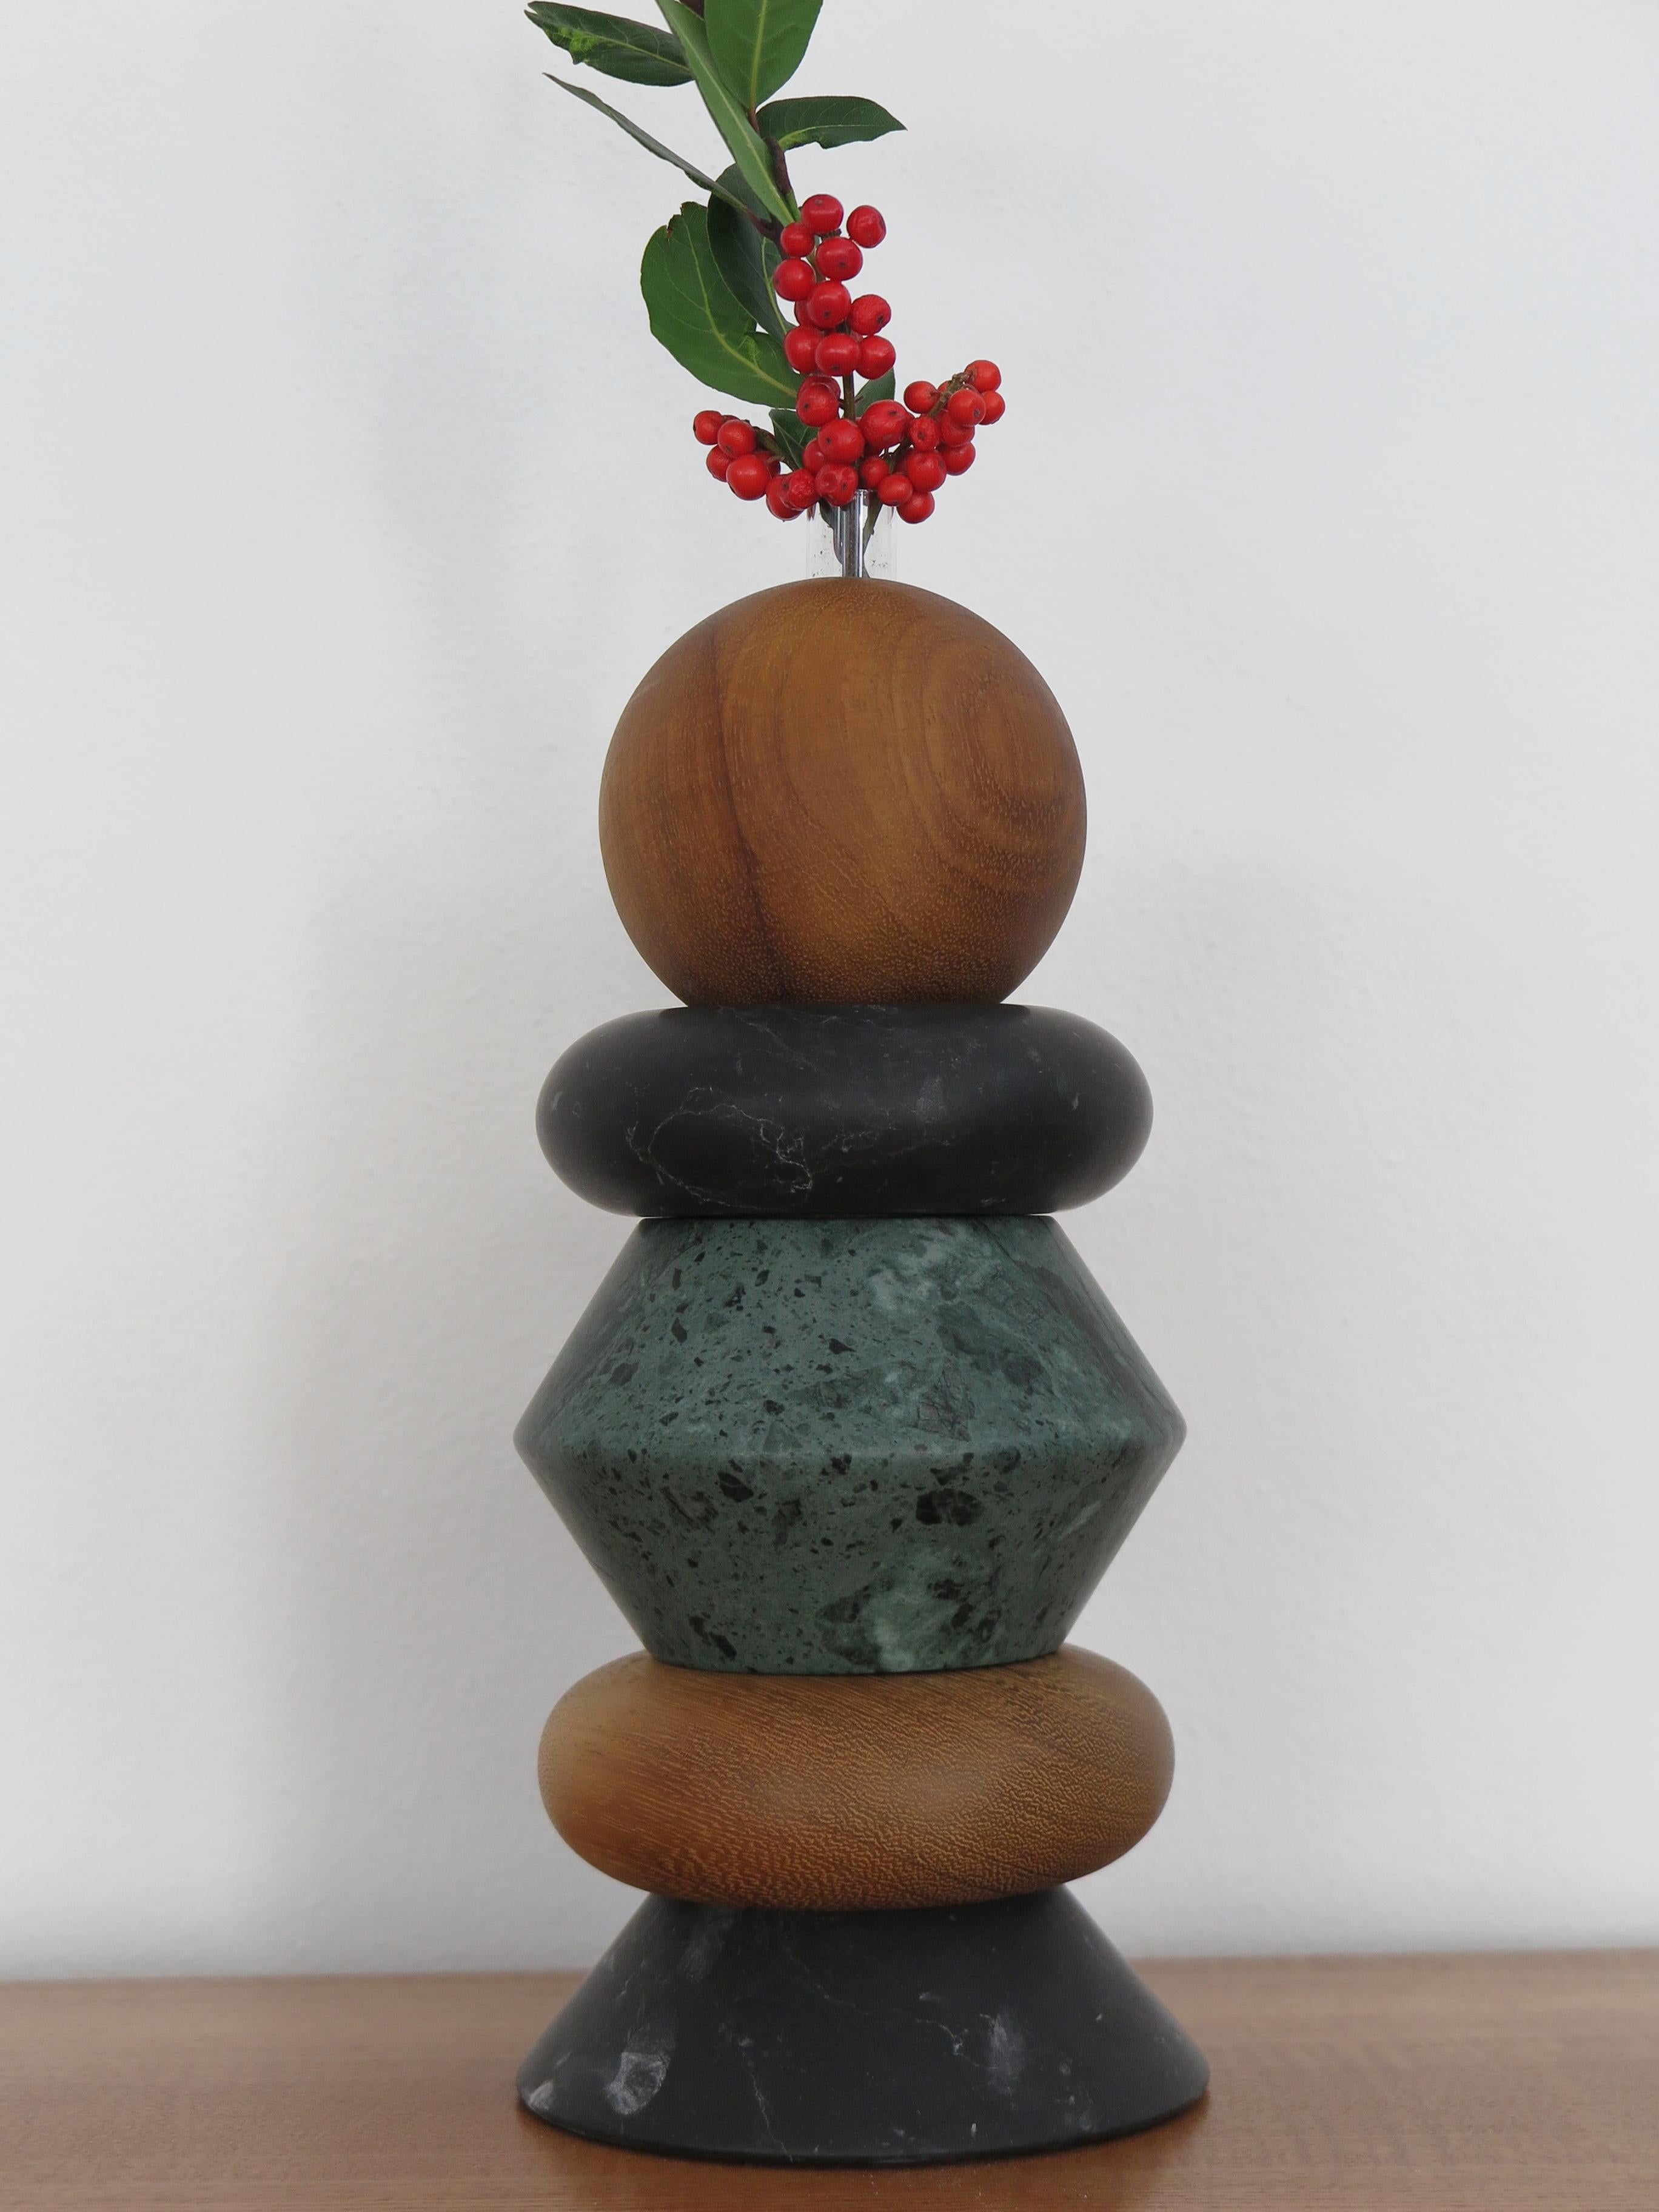 Italian contemporary sculpture, candle holder and flower vase, modular as you like made up of green Alpi marble, black marble, and solid wood with including two glass vases for fresh flowers.
The various elements can be composed and stacked as